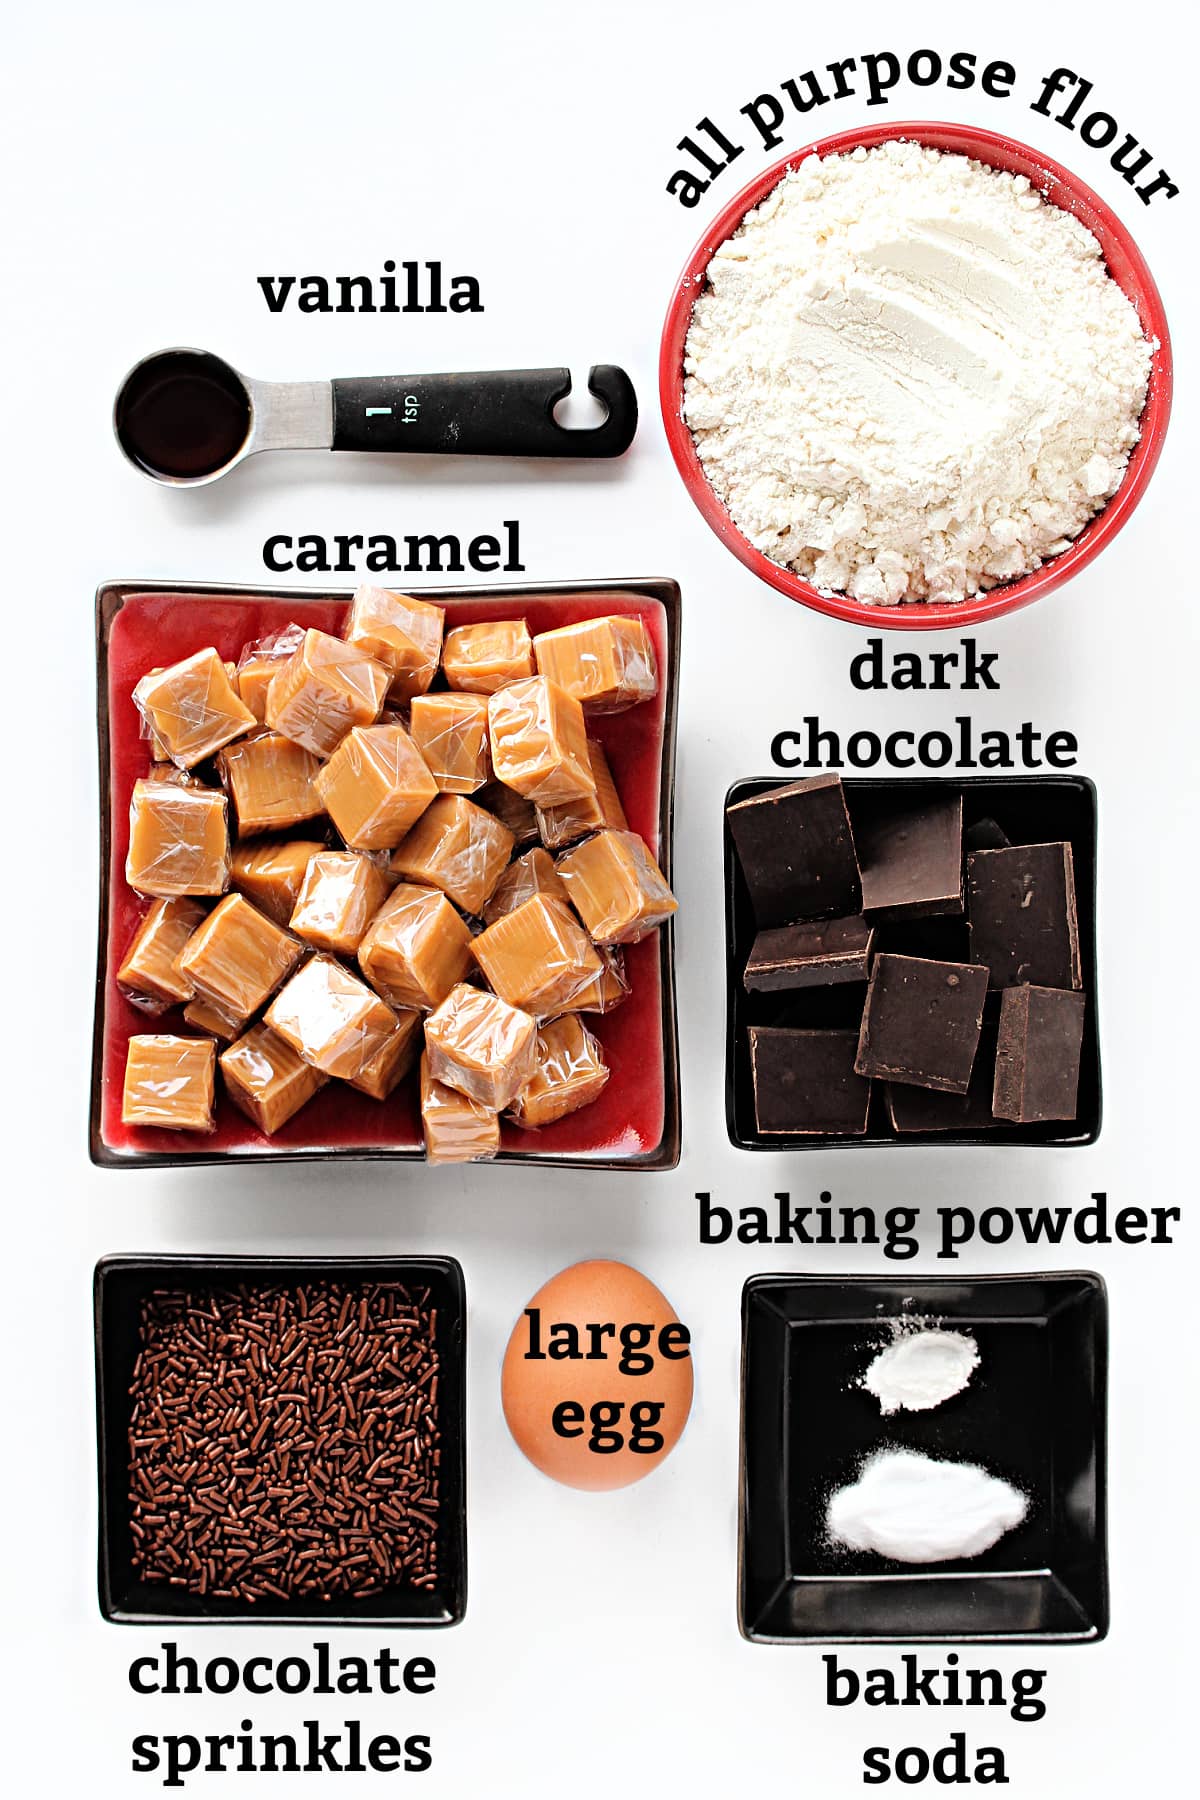 Ingredients labeled, vanilla extract, all purpose flour, caramels, dark chocolate, sprinkles, large egg, baking powder.